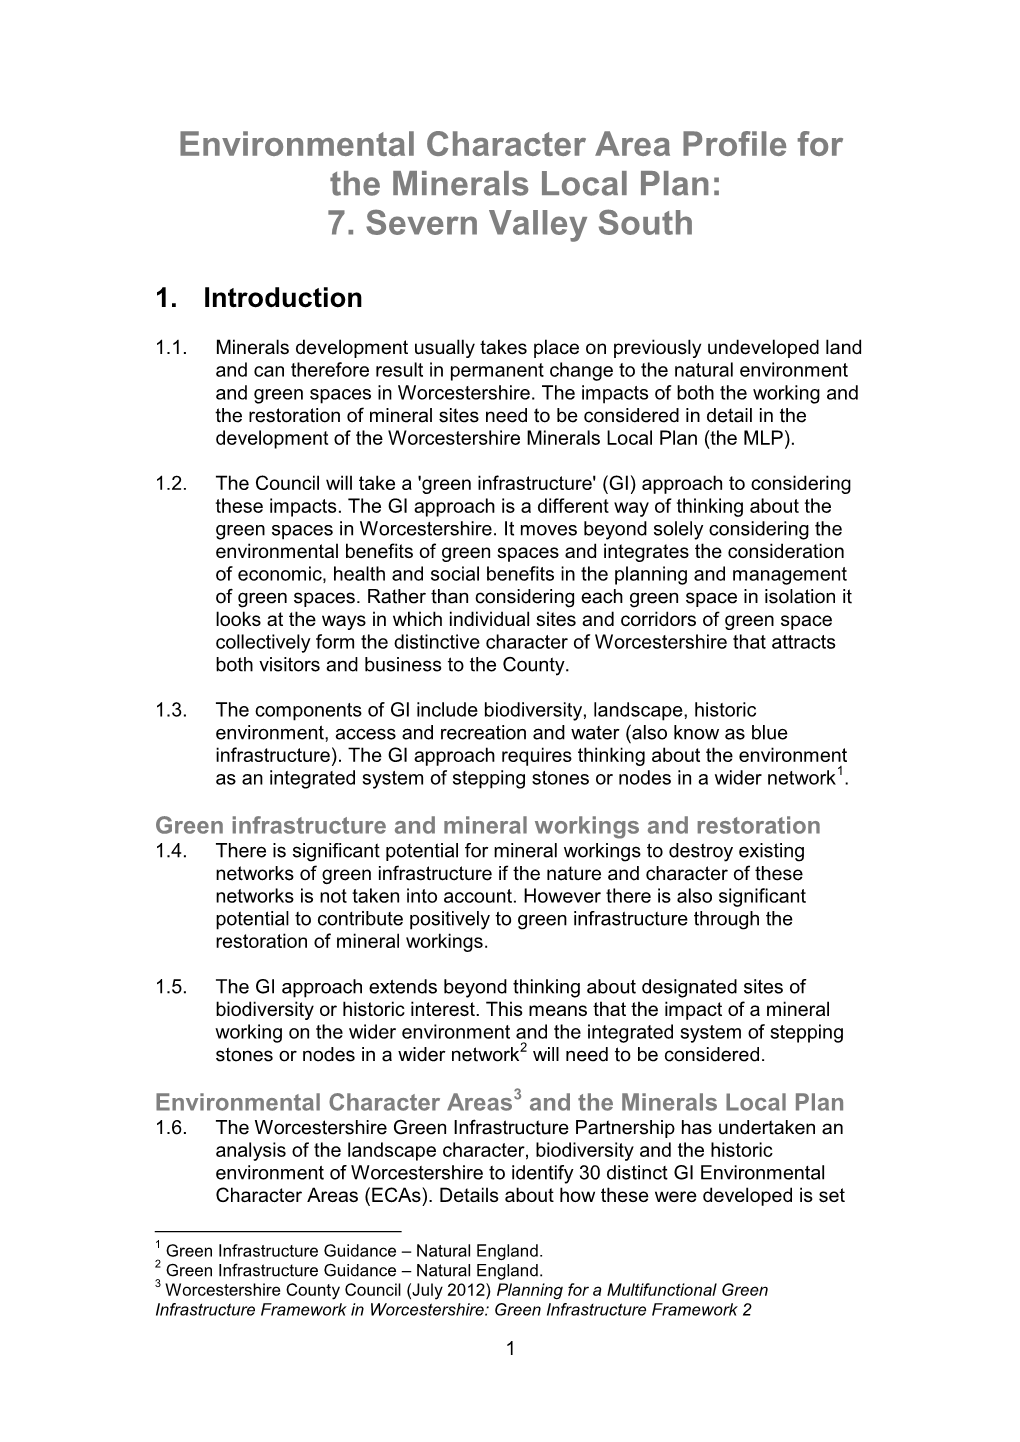 7. Severn Valley South